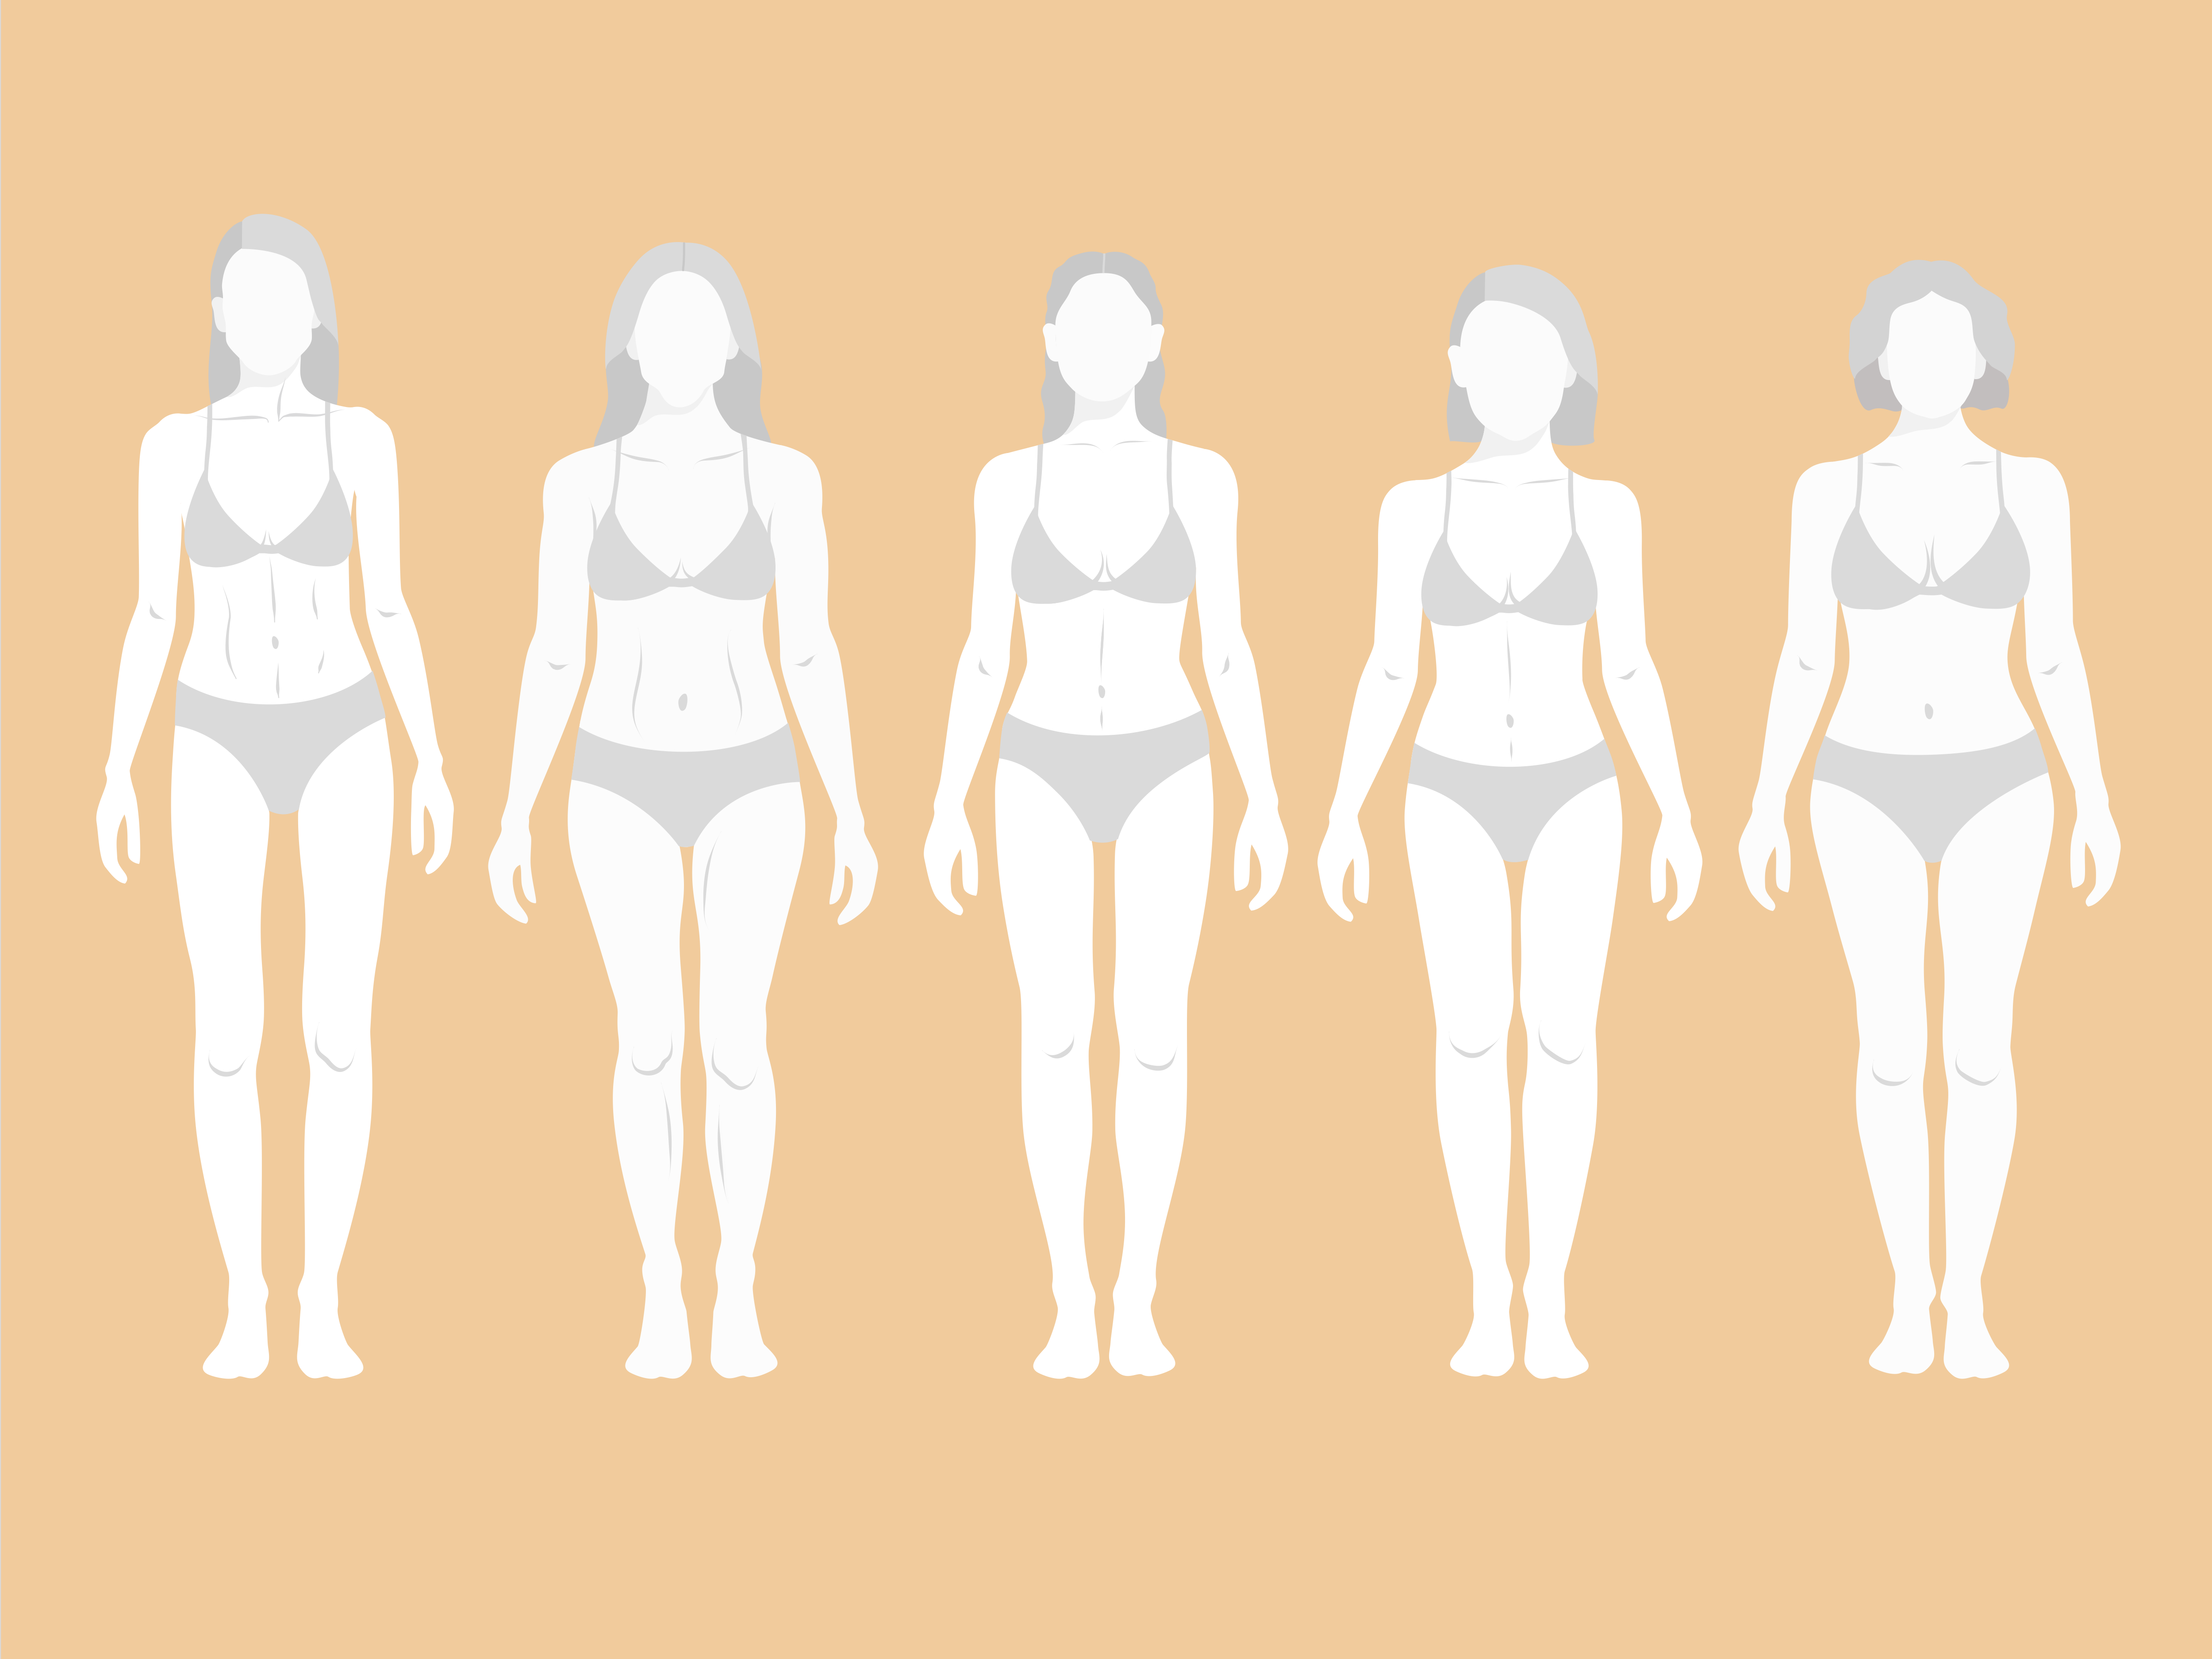 Kibbe Body Type Quiz With Illustrations (very specific) - Our